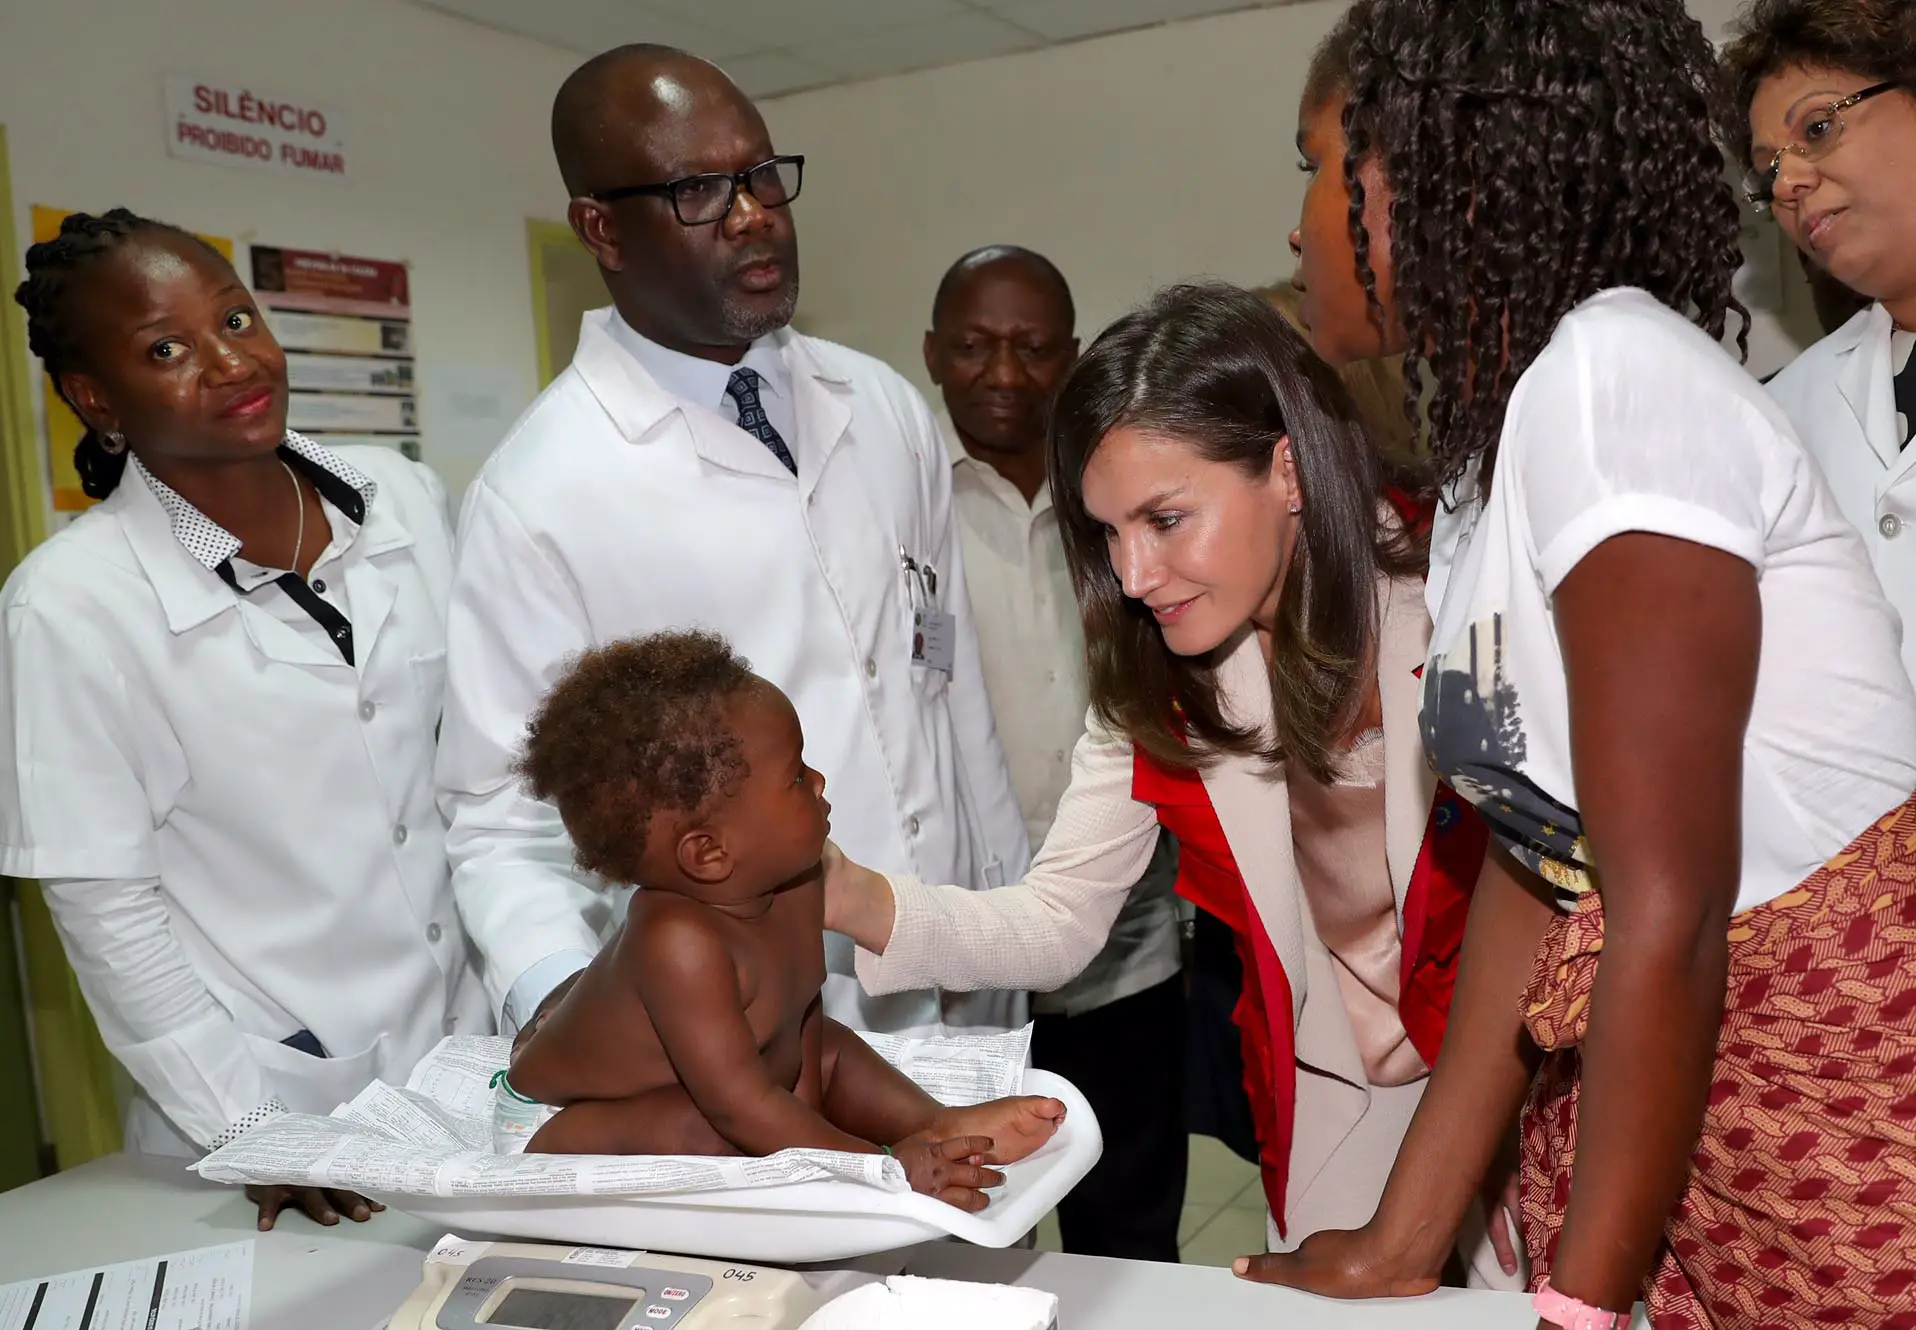 Queen Letizia chose a calm and casual look for day 1 of Mozambique visit